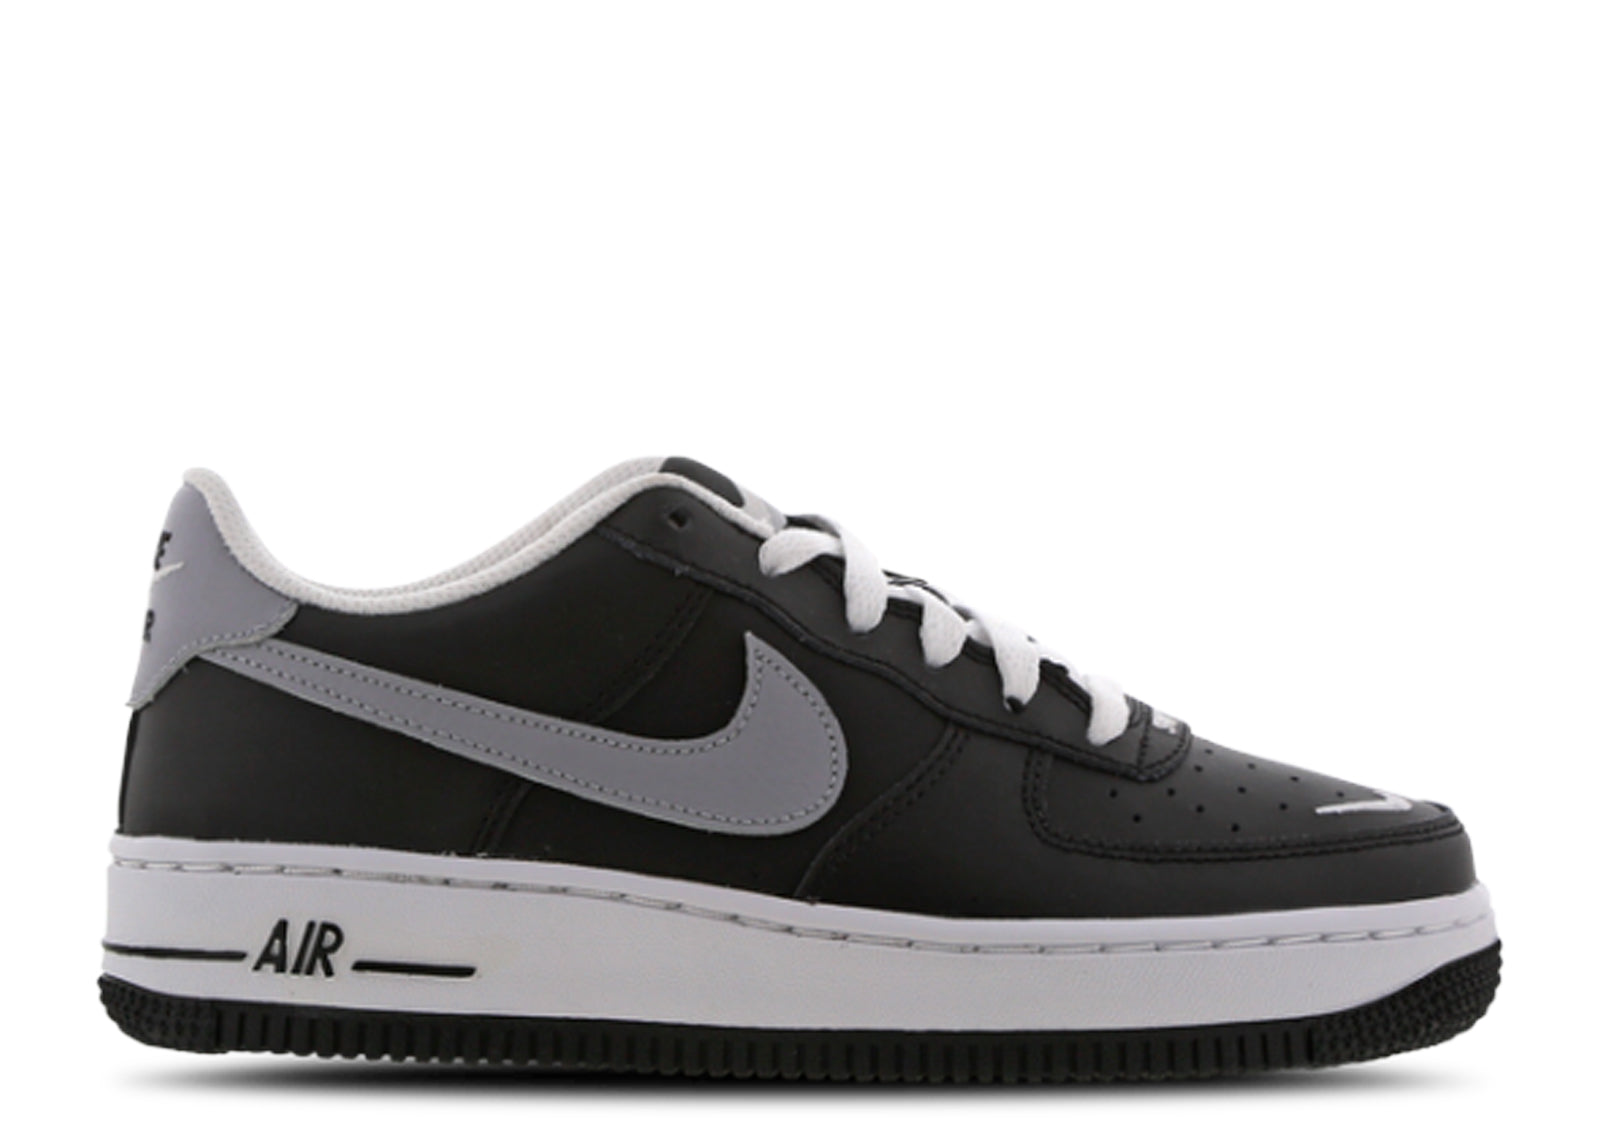 Second Chance - motors Nike Air Force 1 Black Sport GS - 37,5 | NEW